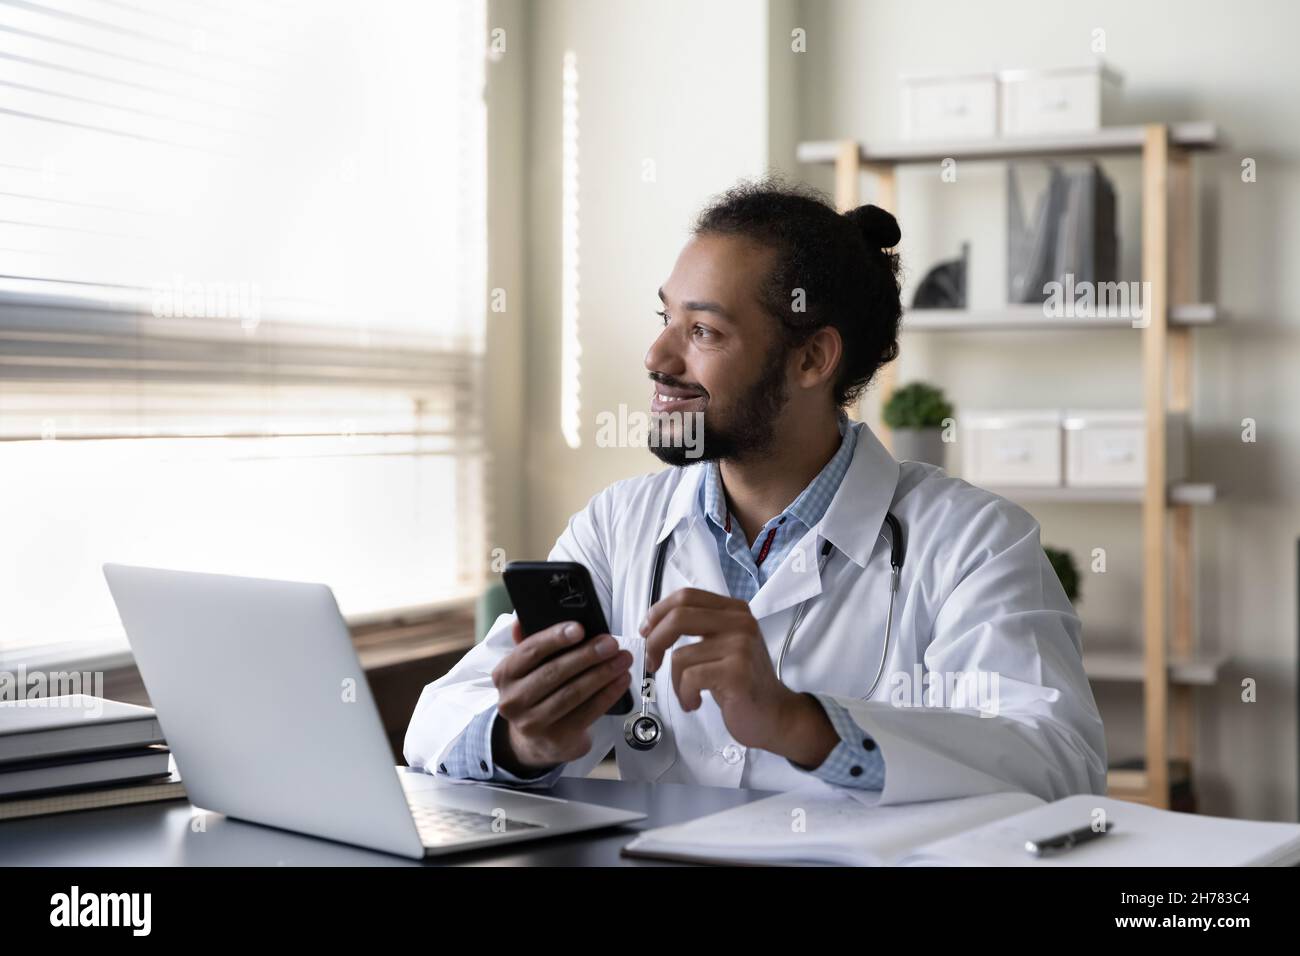 Smiling pensive African American doctor holding smartphone, sitting at desk Stock Photo